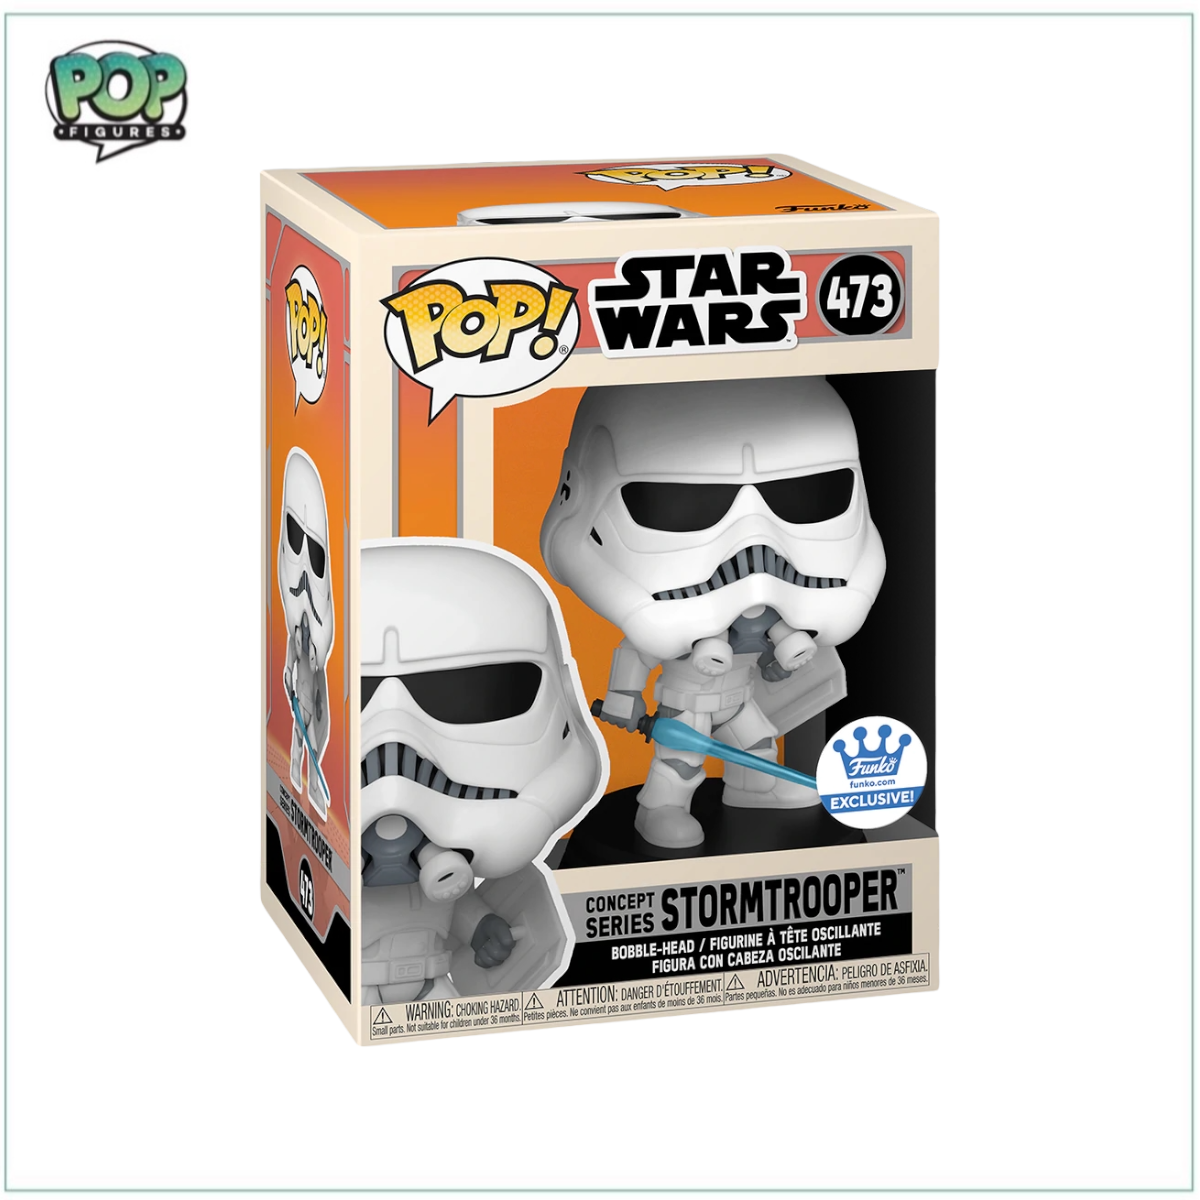 Concept Series Stormtrooper #473 (w/Shield) Funko Pop! - Star Wars - Funko Shop Exclusive - Angry Cat